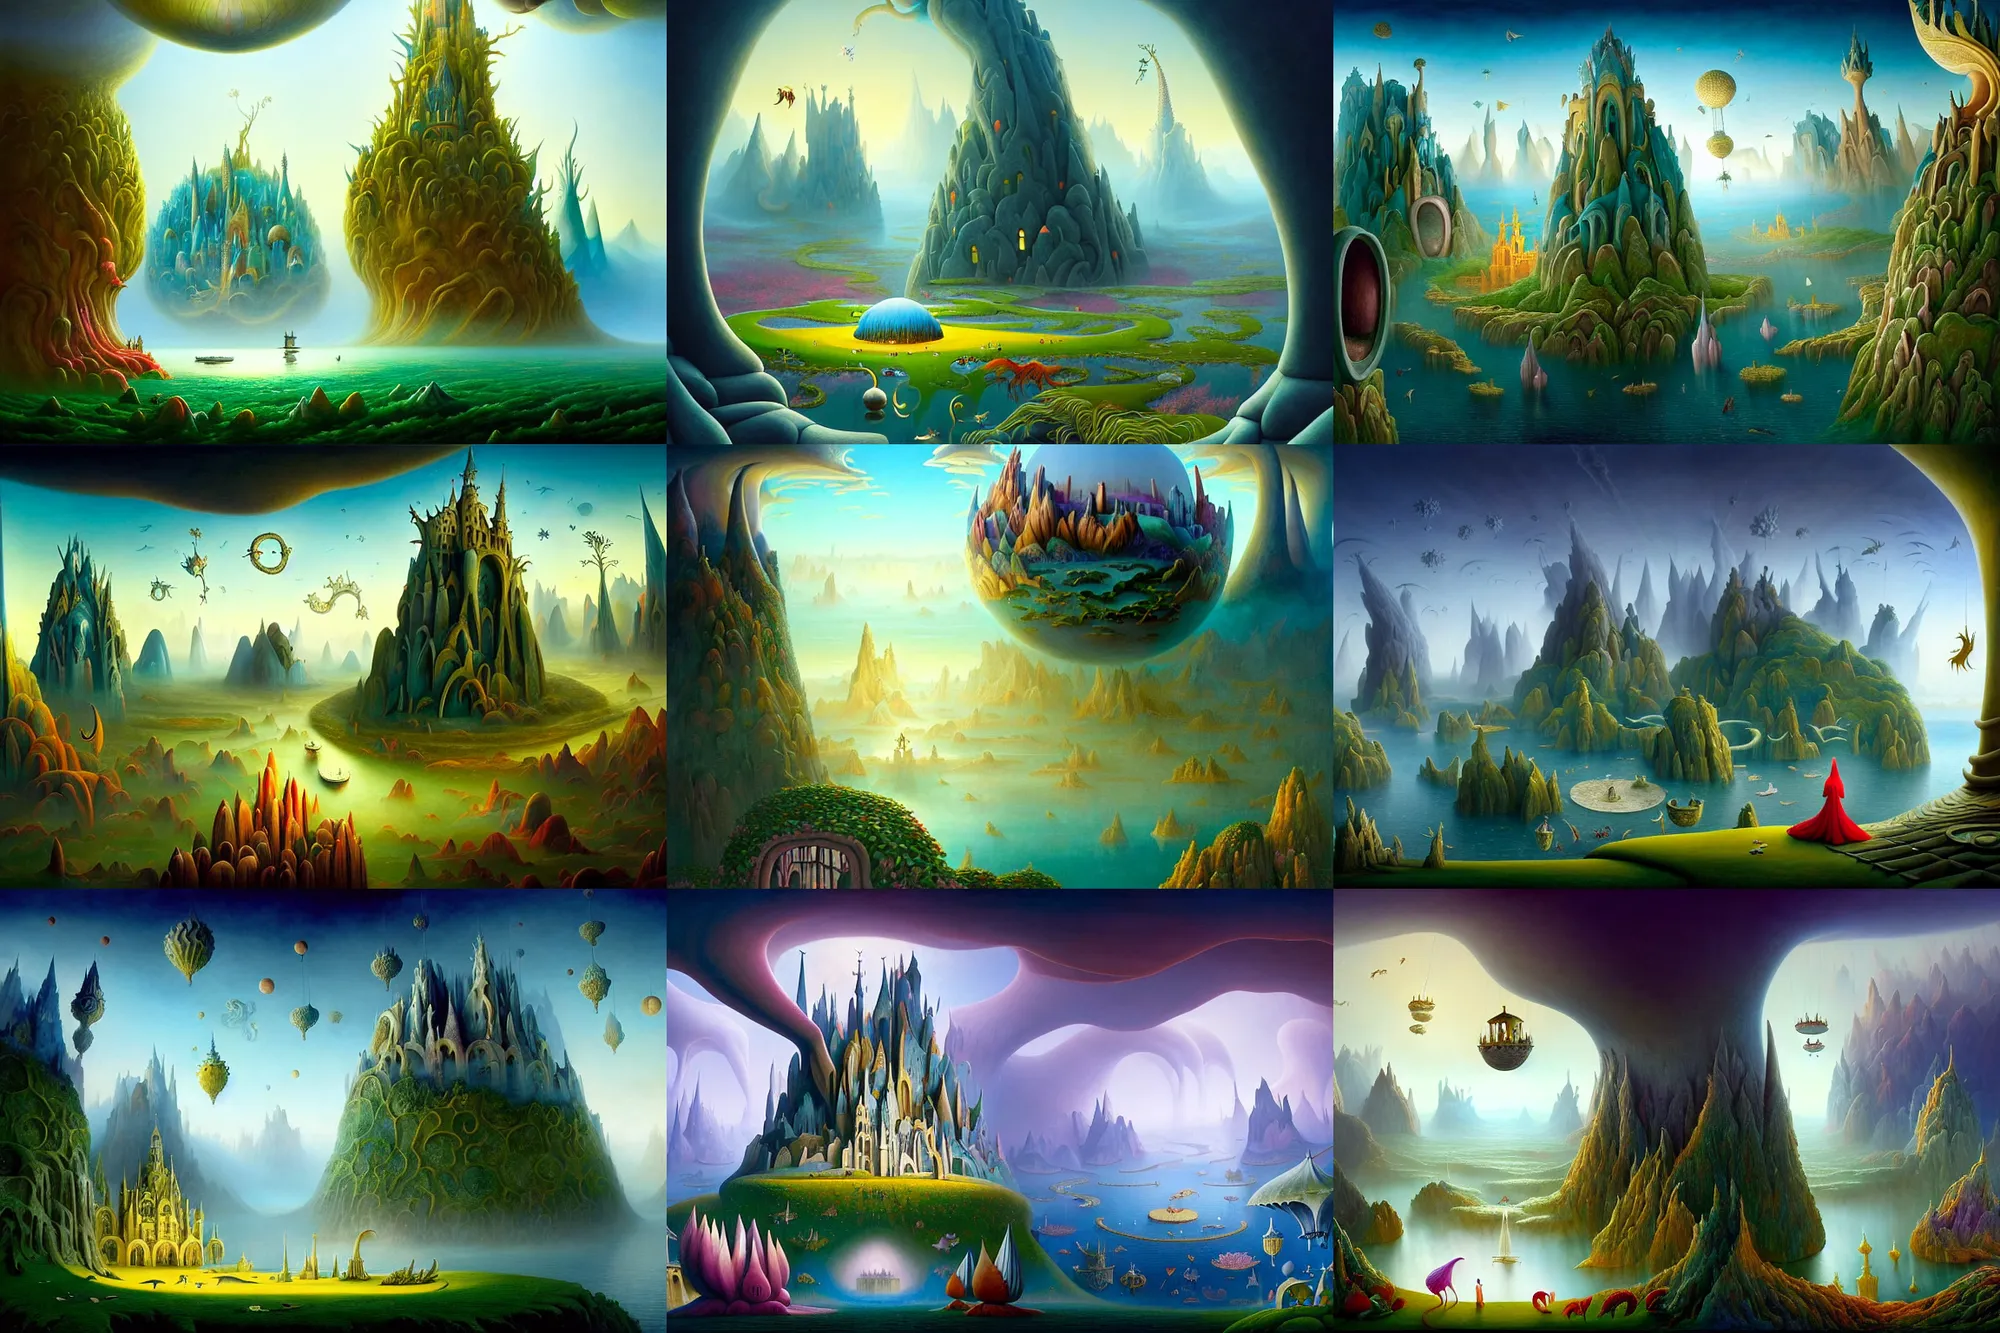 Prompt: a beguiling epic stunning beautiful and insanely detailed matte painting of windows into dream worlds with surreal architecture designed by Heironymous Bosch, dream world populated with mythical whimsical creatures, mega structures inspired by Heironymous Bosch's Garden of Earthly Delights, vast surreal landscape and horizon by Asher Durand and Cyril Rolando and Andrew Ferez, masterpiece!!!, grand!, imaginative!!!, whimsical!!, epic scale, intricate details, sense of awe, elite, wonder, insanely complex, masterful composition!!!, sharp focus, fantasy realism, dramatic lighting